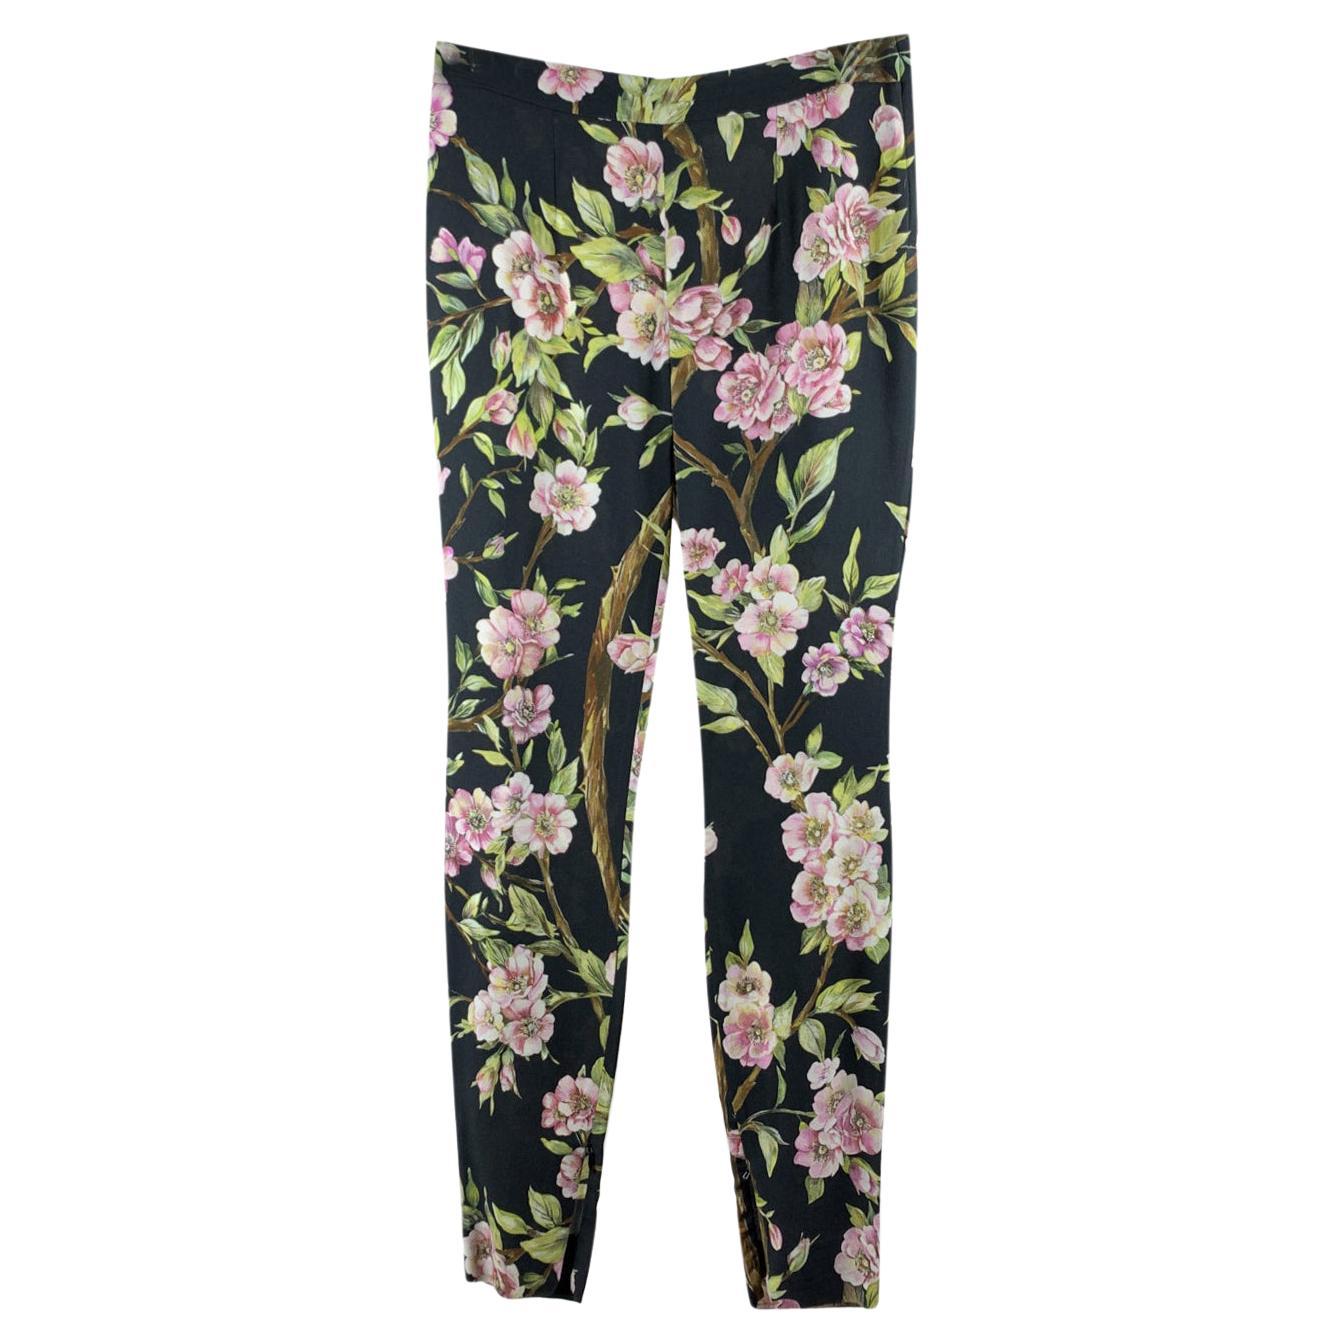 Dolce & Gabbana Floral Silky Fabric Pants with Zip Size S